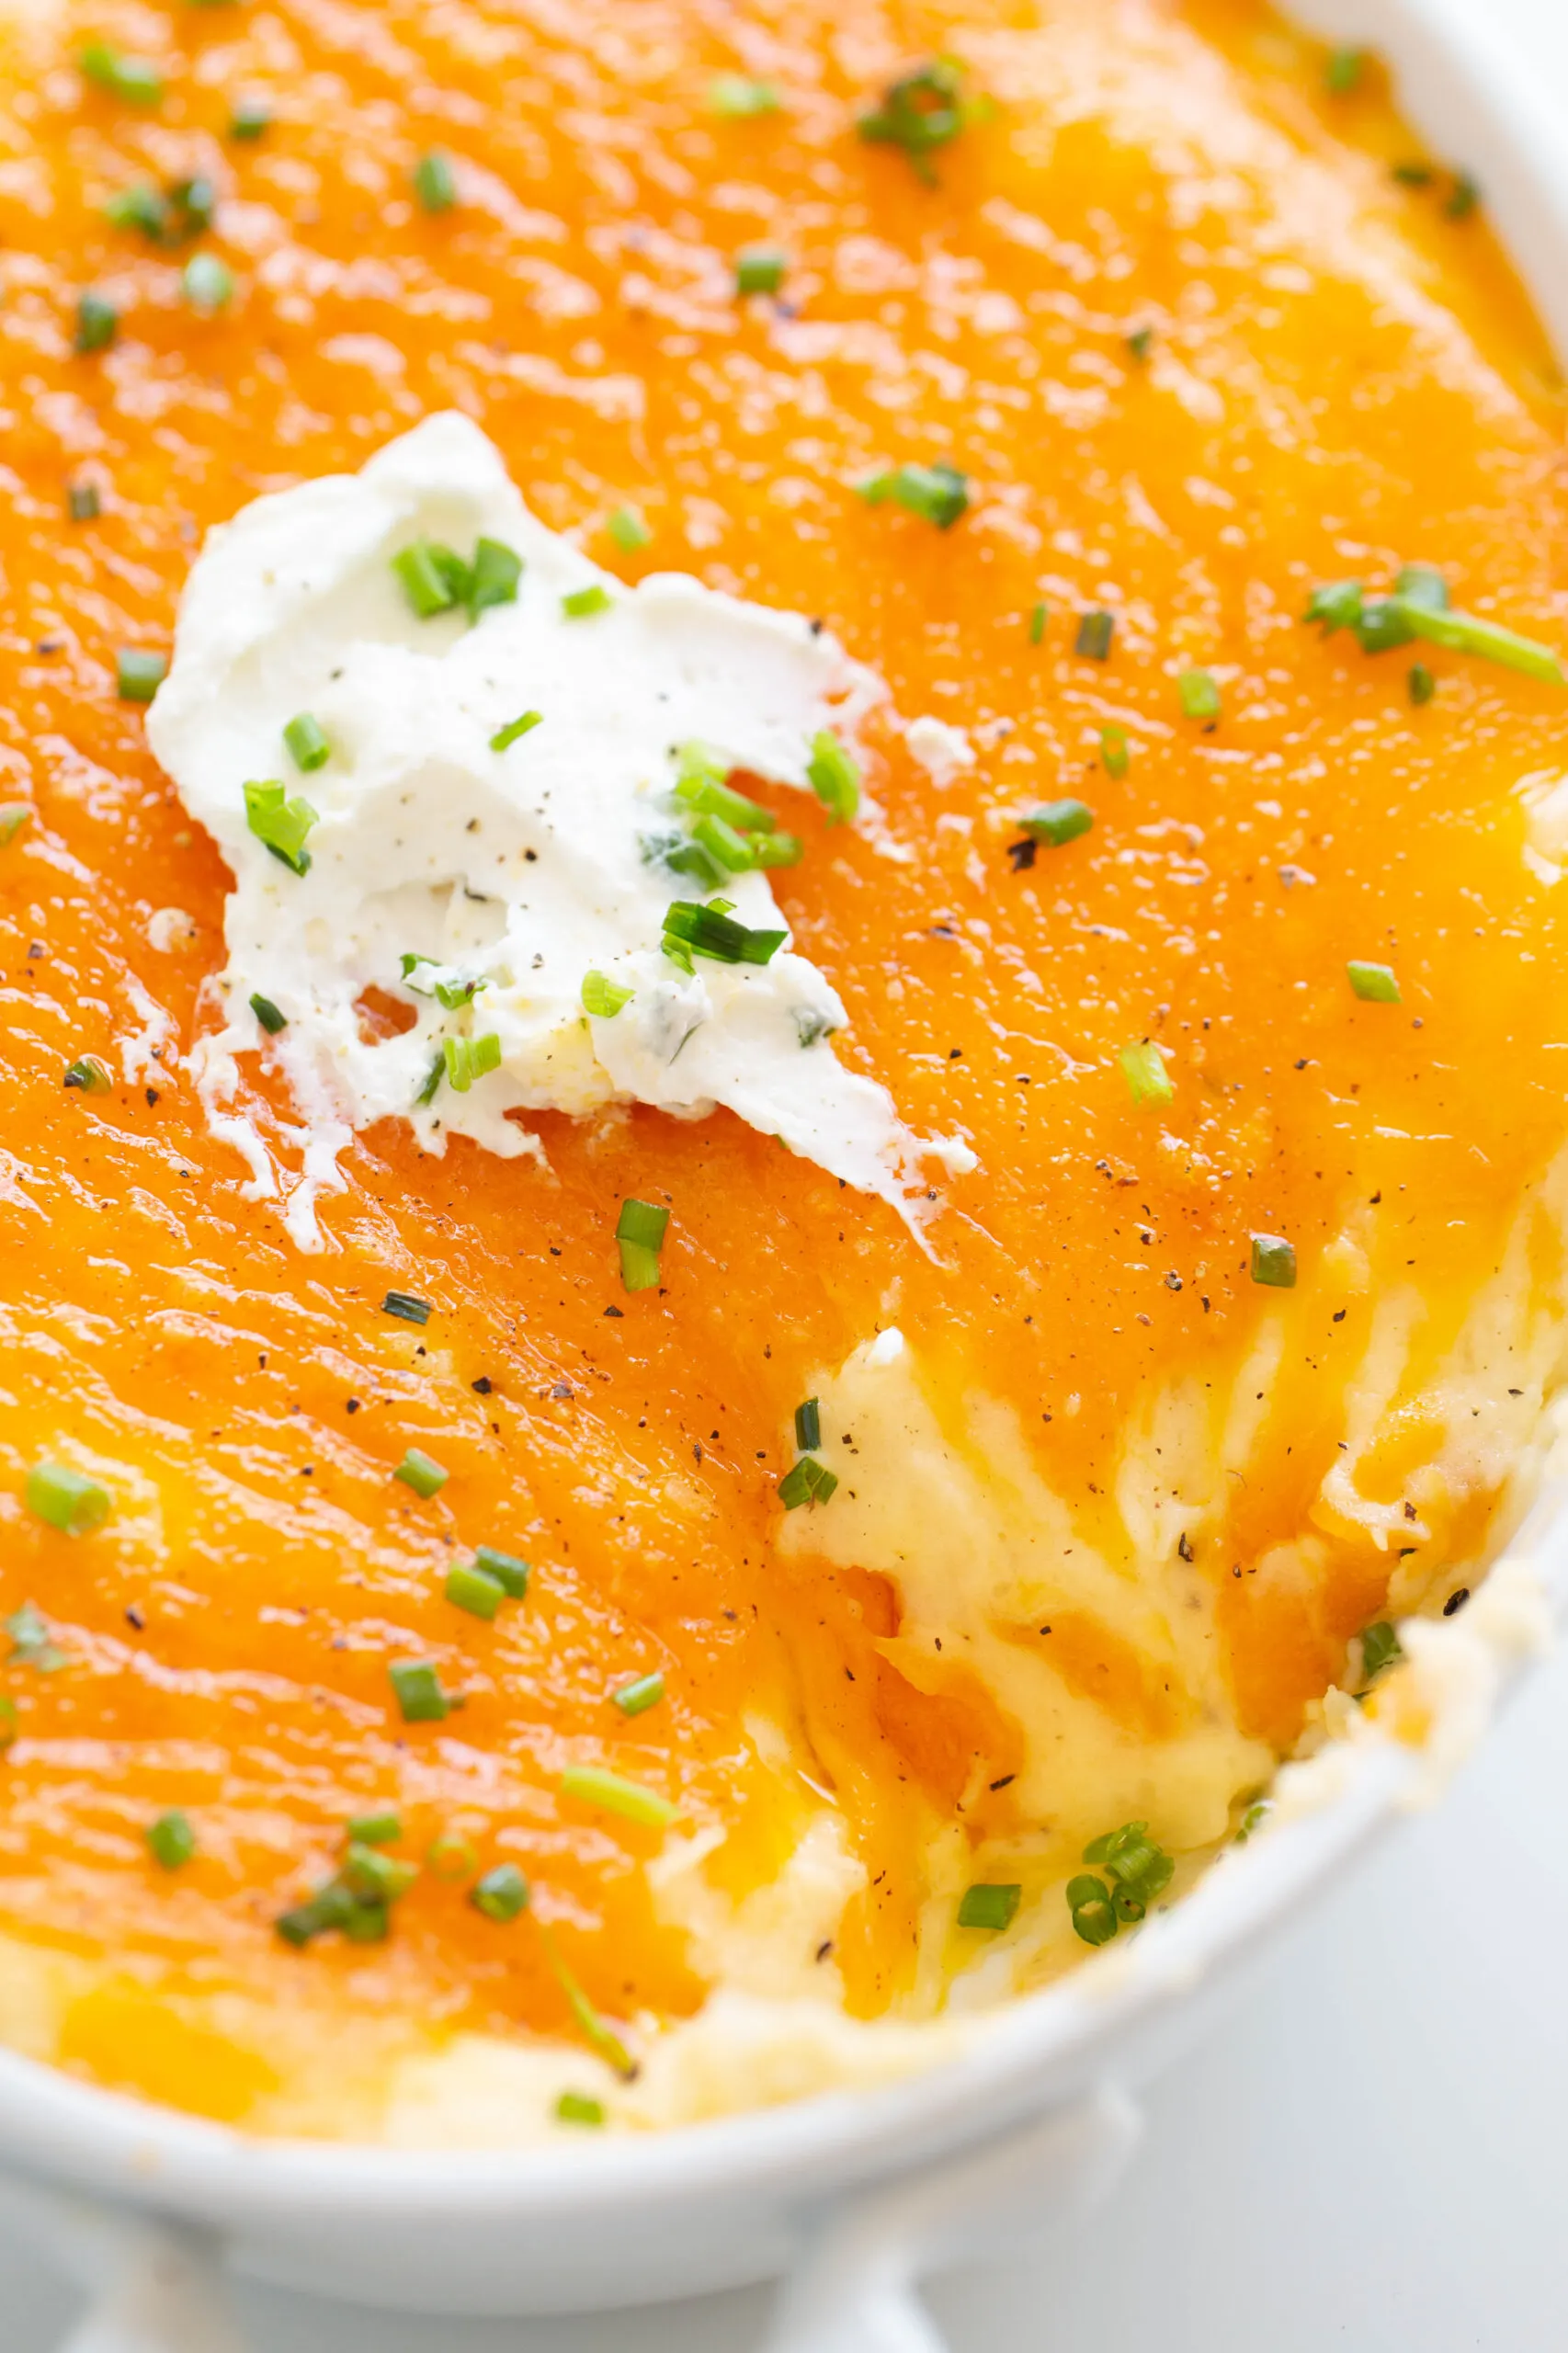 cheddar mashed potatoes baked in a dish up close. garnished with chopped chives, sour cream and black pepper